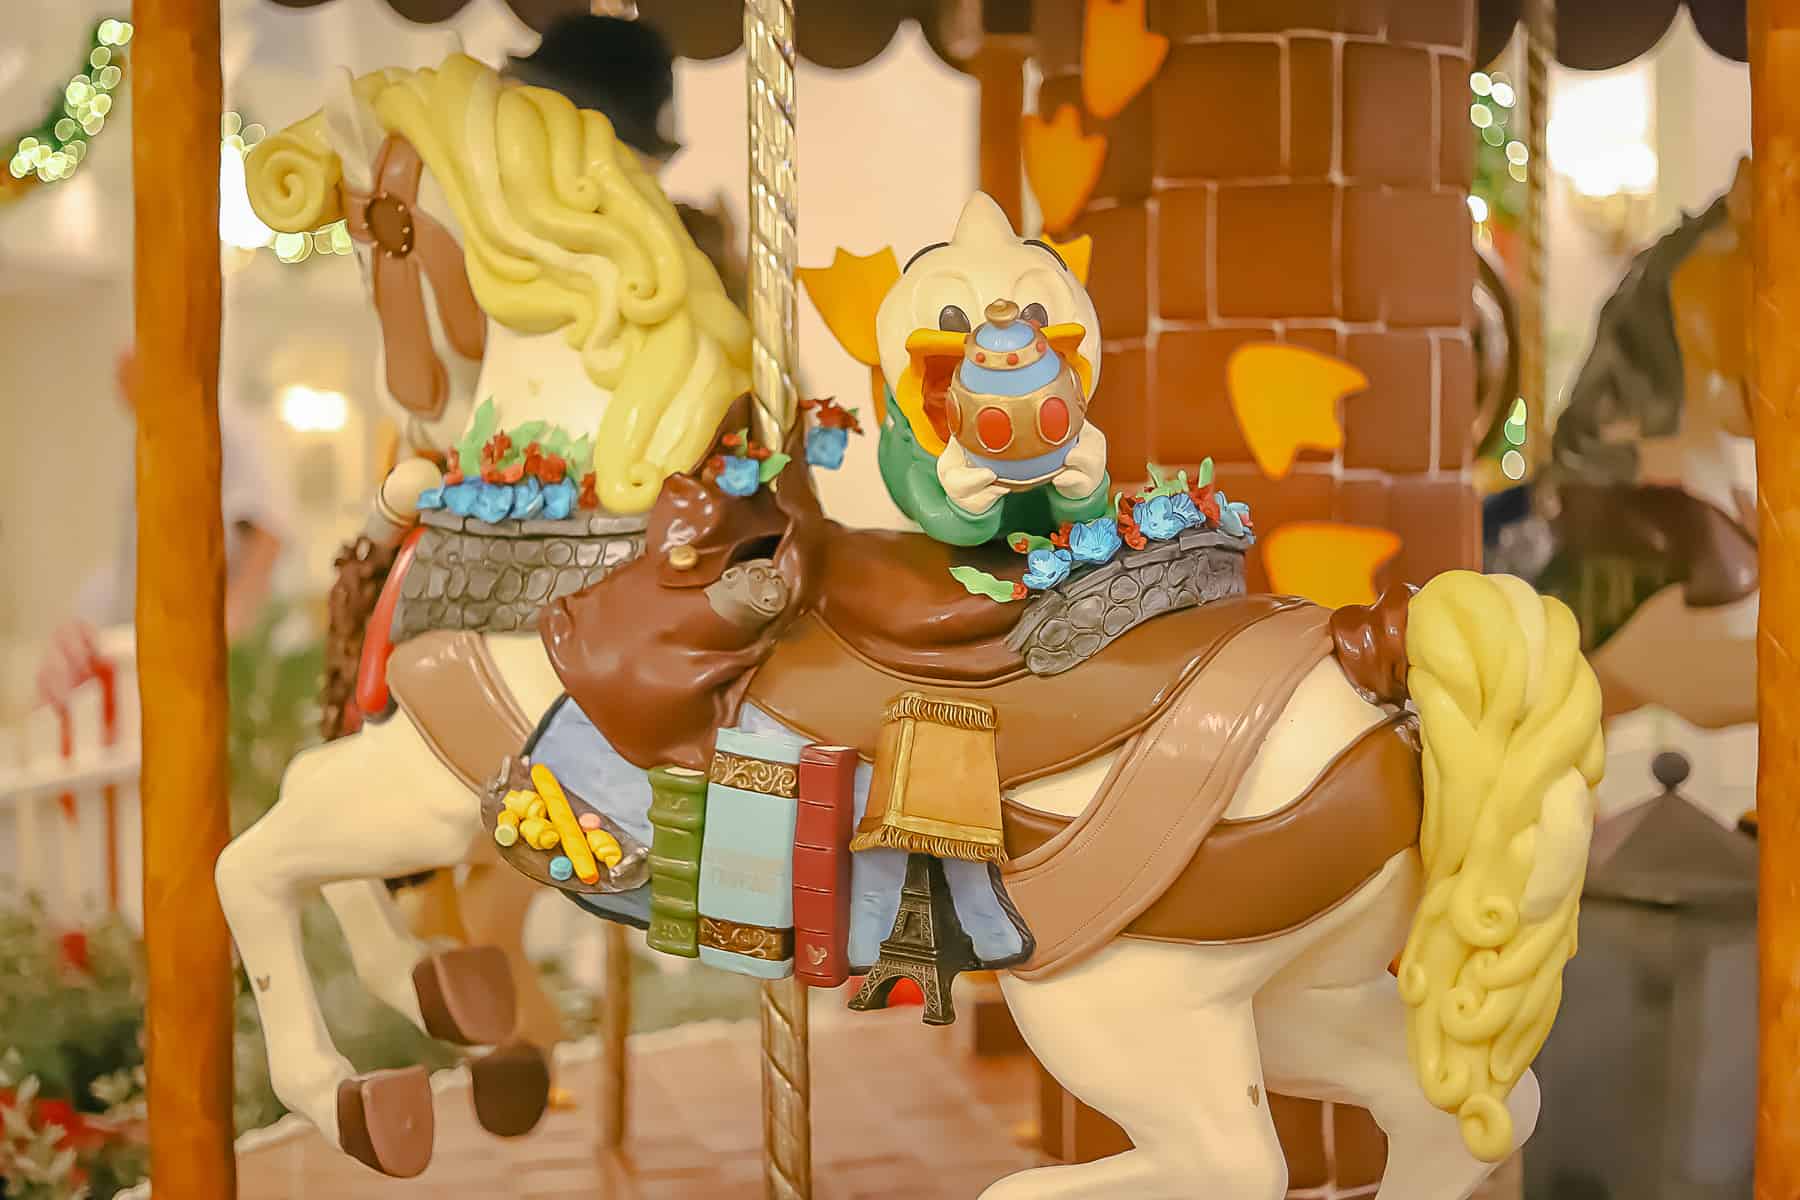 A carousel pony representing the France Pavilion at Epcot with one of Donald's nephews. 